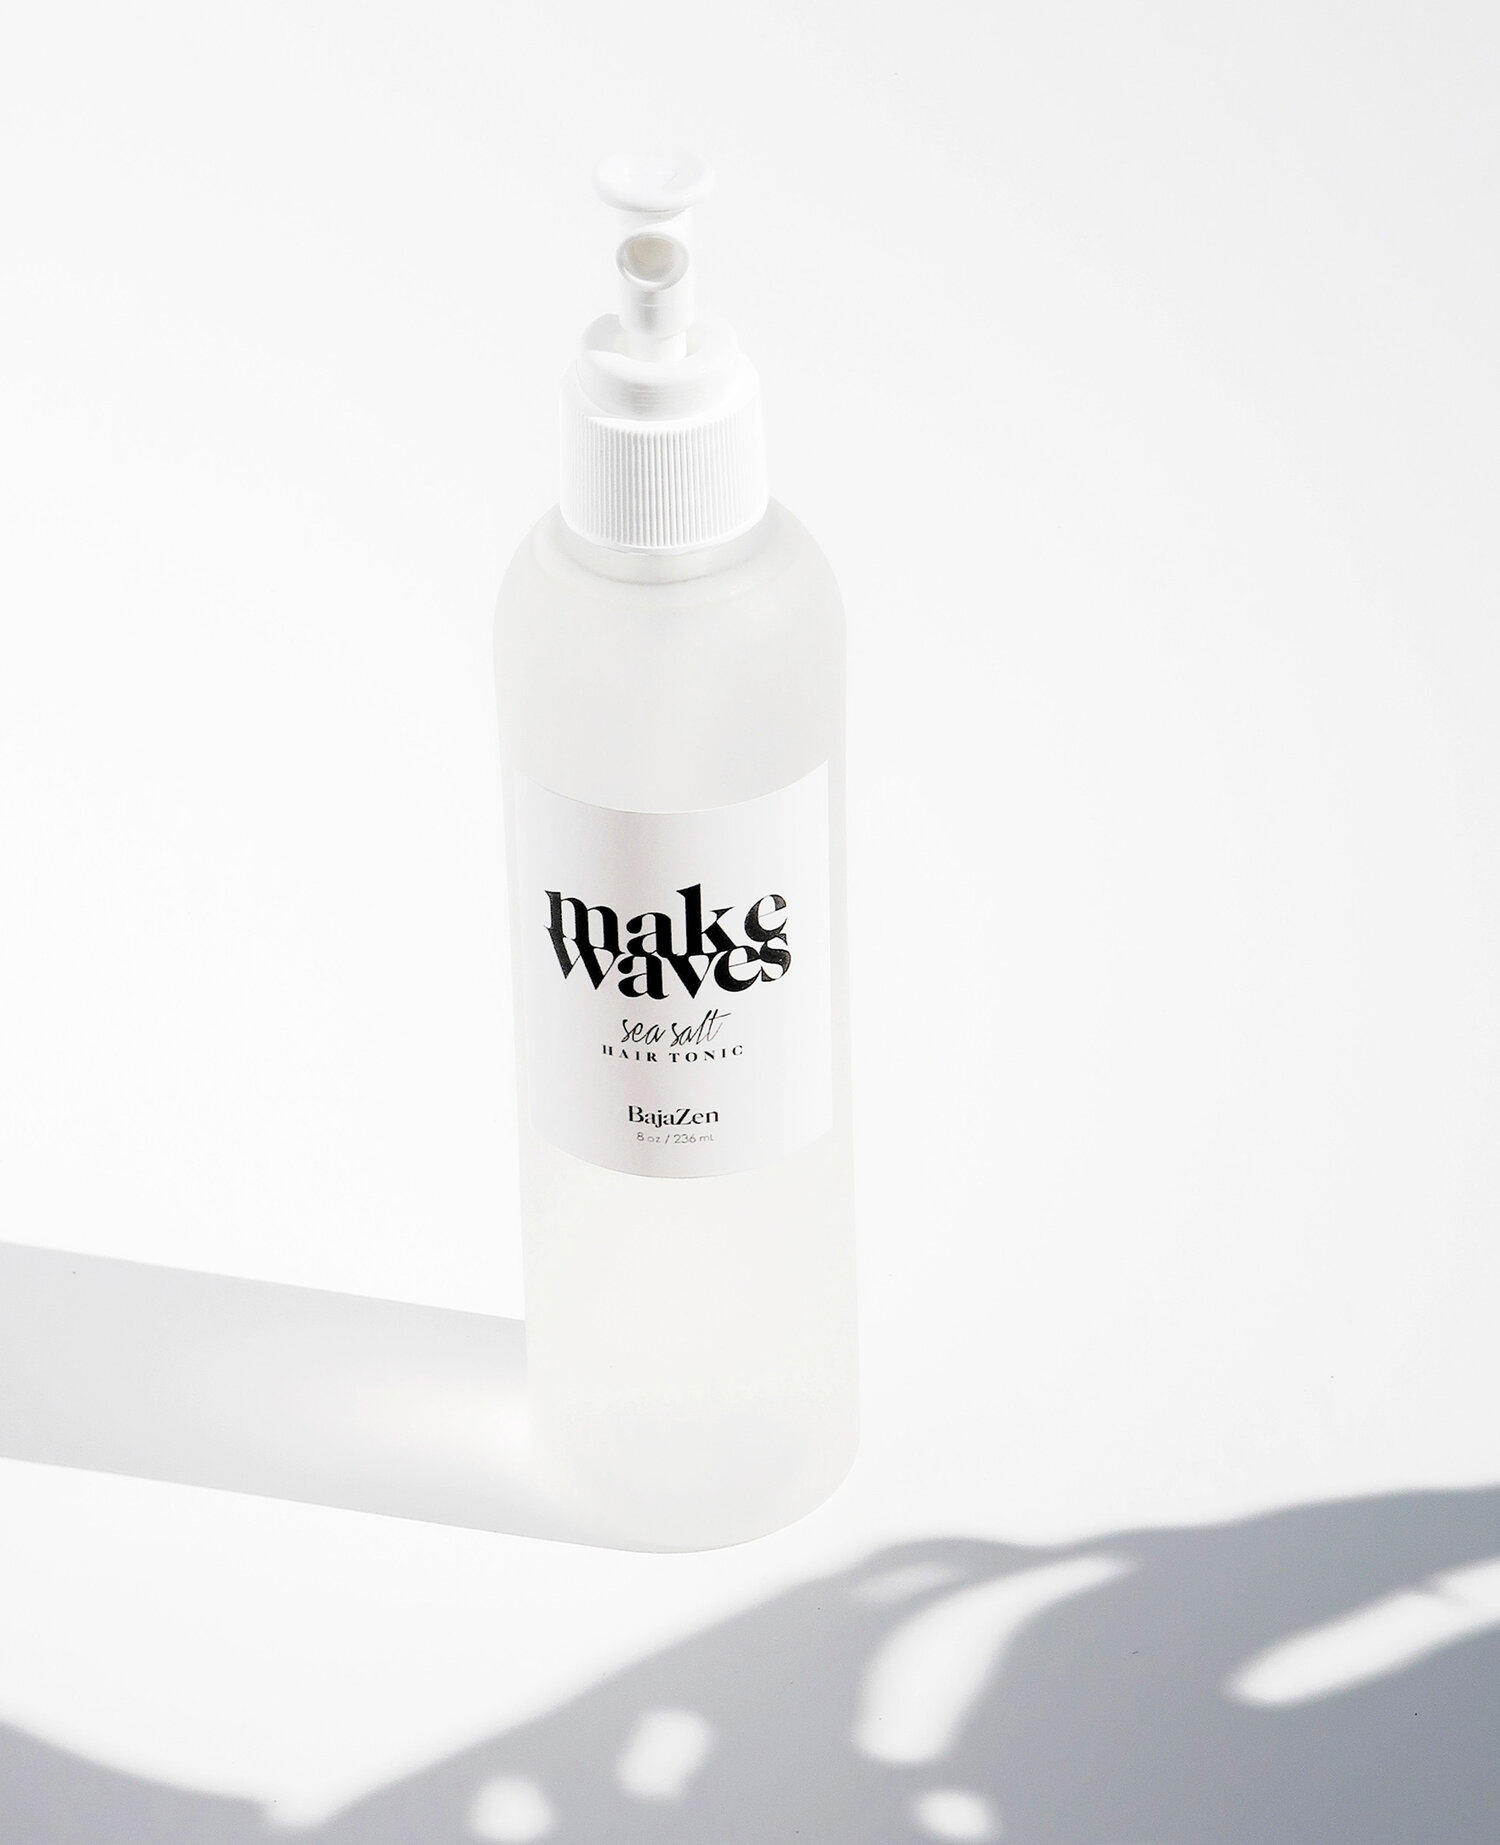 Hair Tonic bottle ready for use